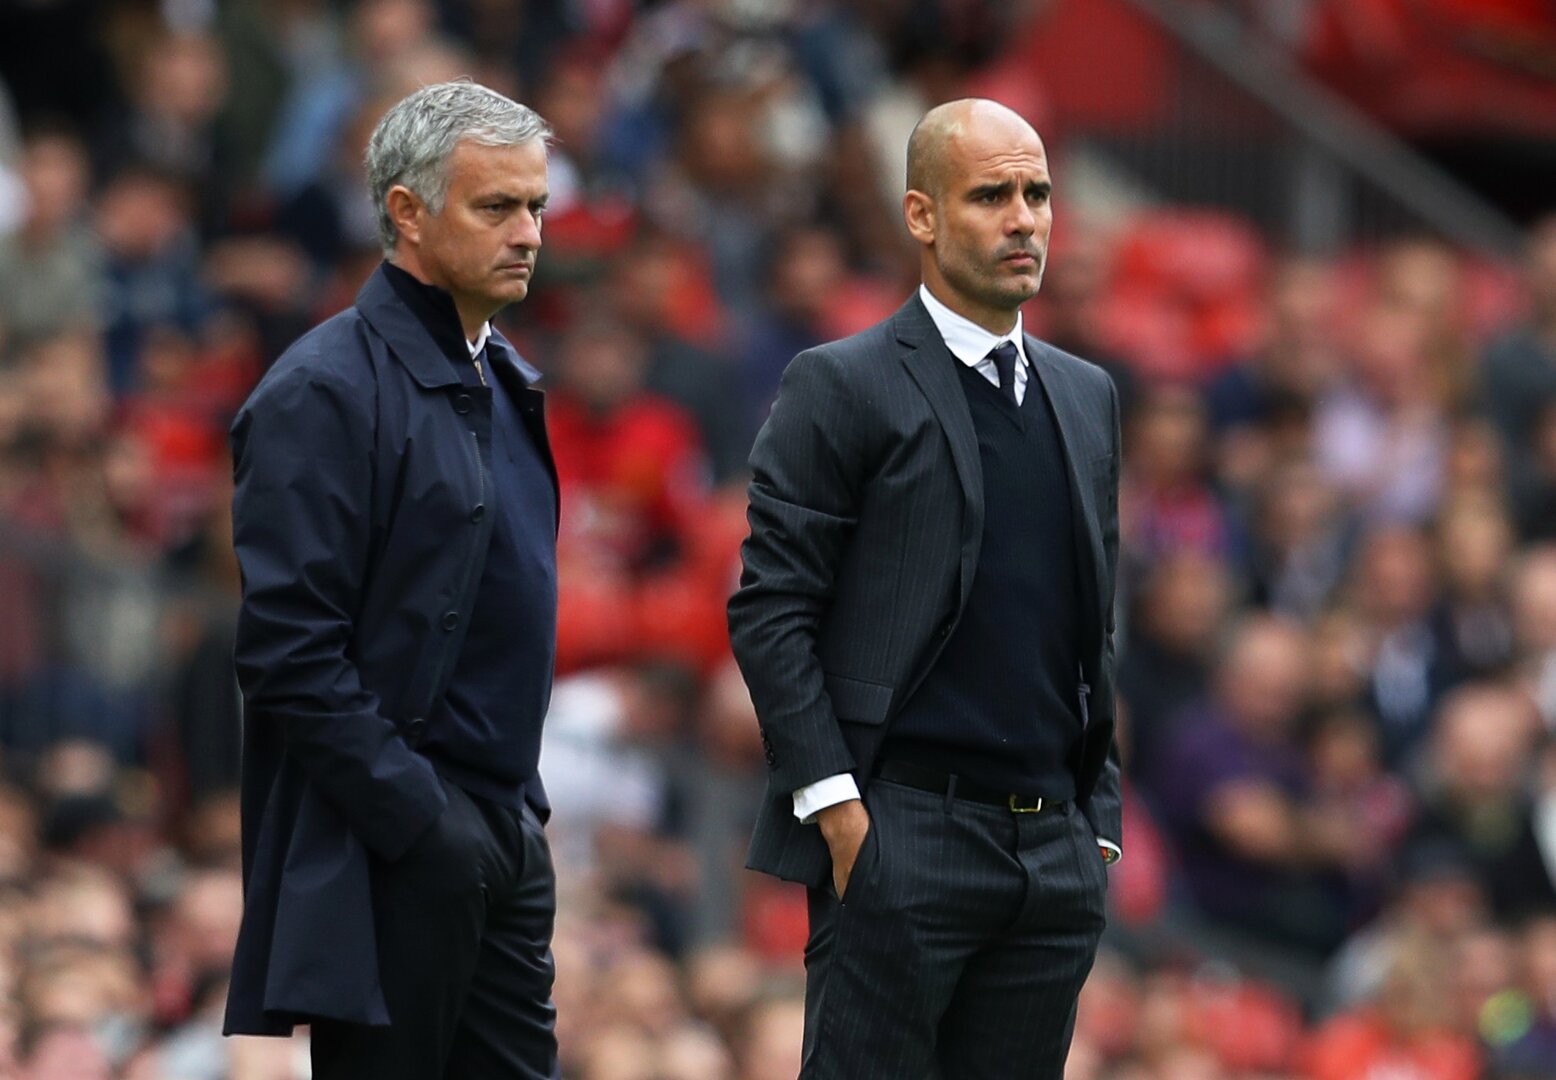 Pep Guardiola: Jose Mourinho is a huge competitor, his teams are tough